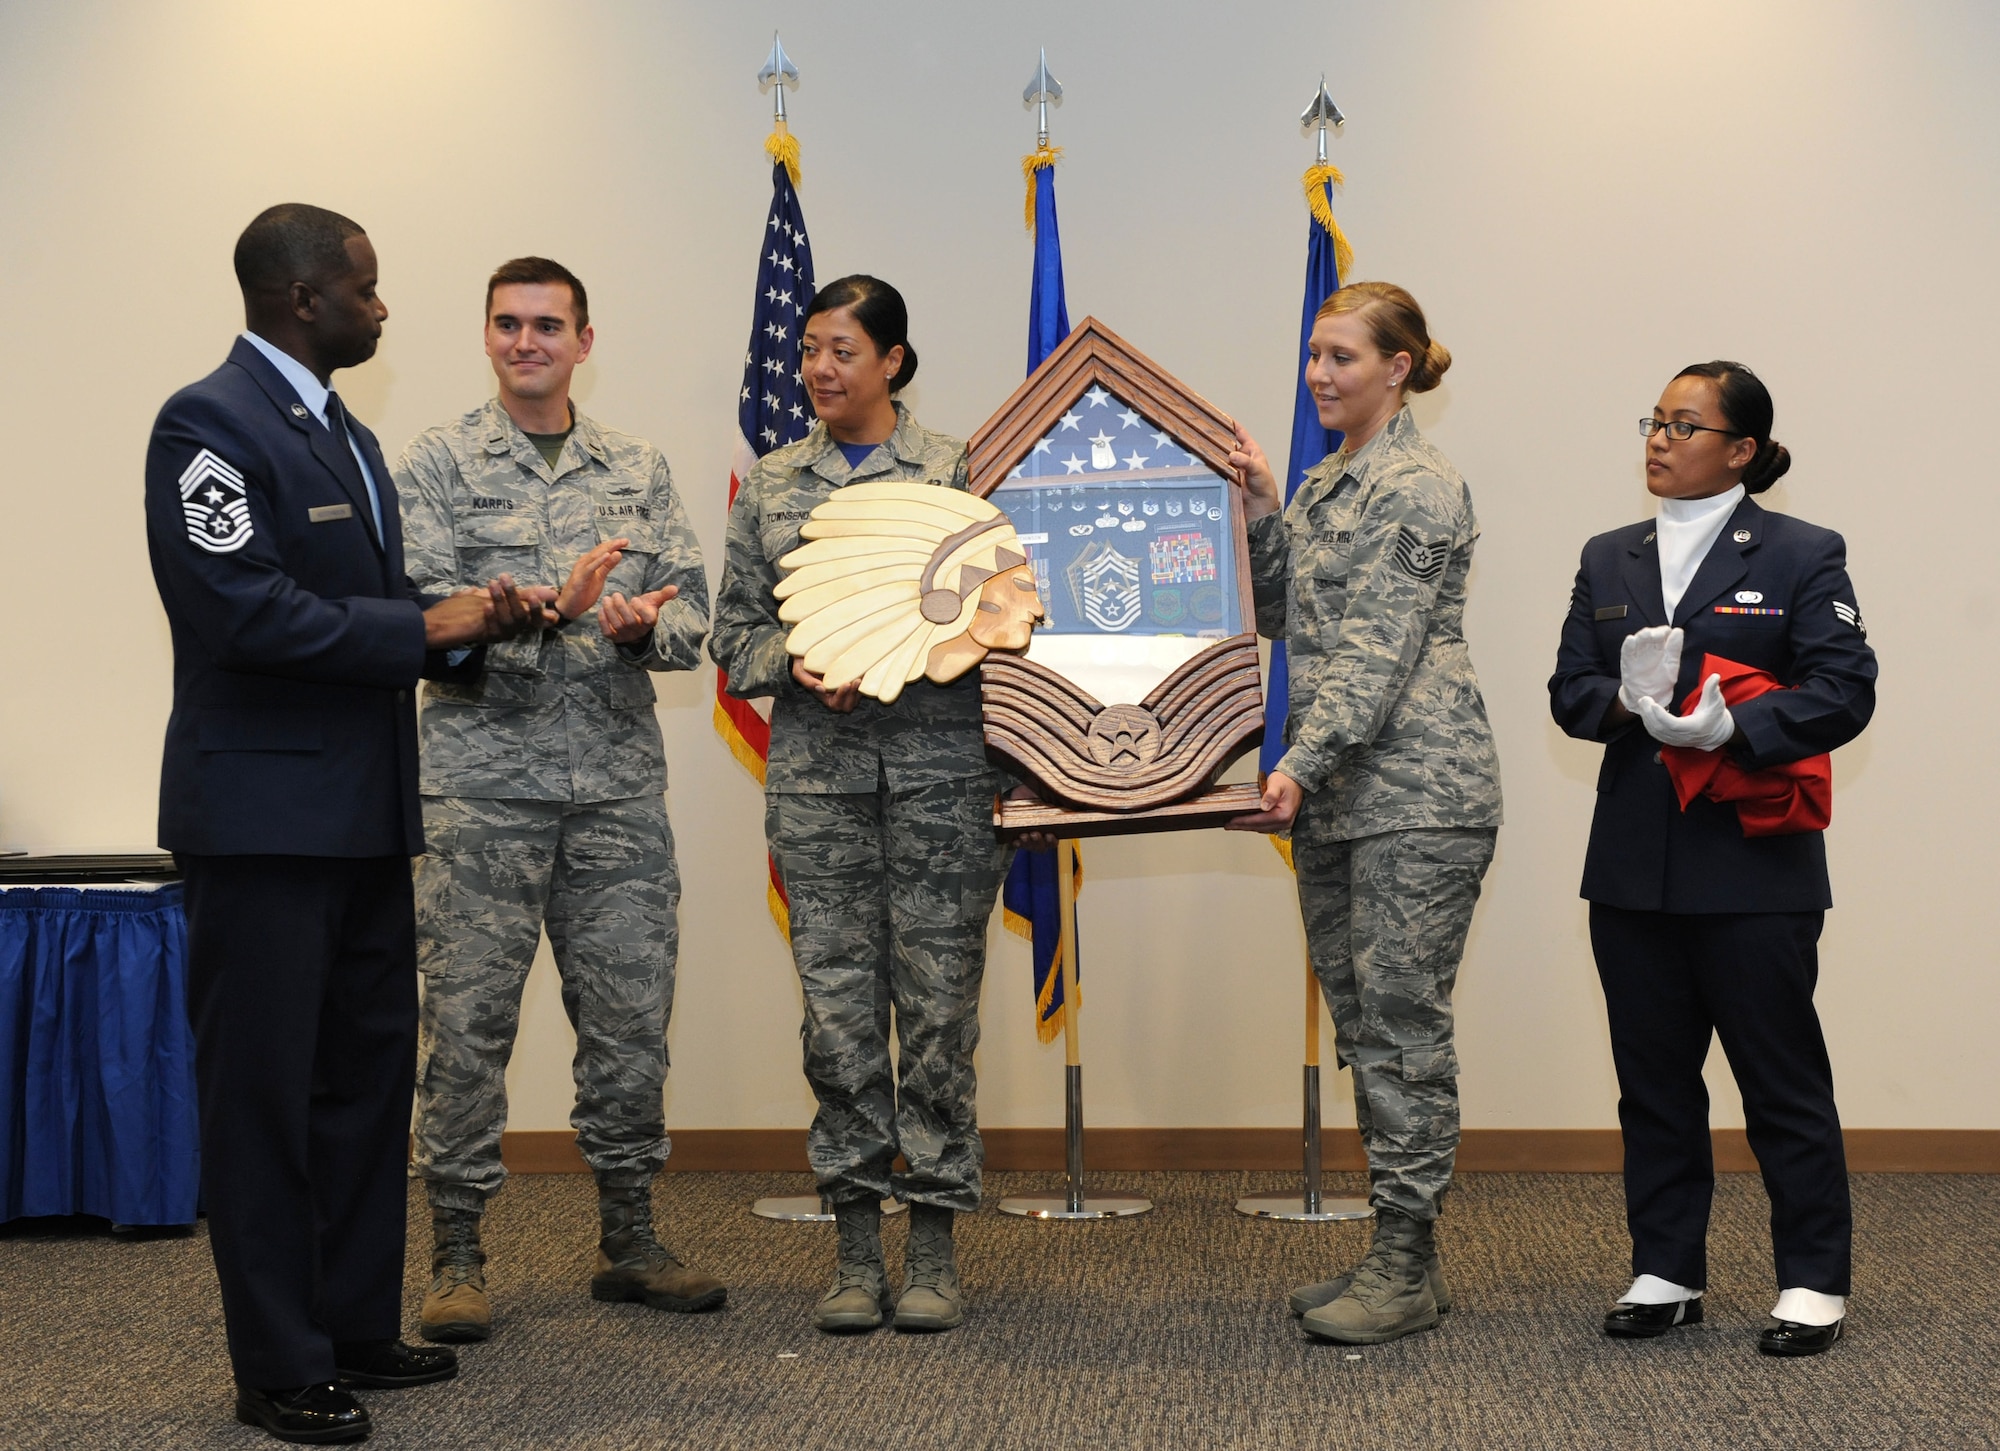 Members of different base private organizations present Chief Master Sgt. Harry Hutchinson, 81st Training Wing command chief, a gift during his retirement ceremony at the Roberts Consolidated Aircraft Maintenance Facility Aug. 19, 2016, on Keesler Air Force Base, Miss. Hutchinson retired with more than 29 years of military service and served multiple assignments in Washington, Korea, Maryland, Japan, Nevada, South Dakota and Africa. He also worked as the superintendent of the U.S. Army’s RED HORSE sites in Iraq and Afghanistan and the Air Force’s 732nd Expeditionary Prime BEEF squadron. (U.S. Air Force photo by Kemberly Groue/Released)